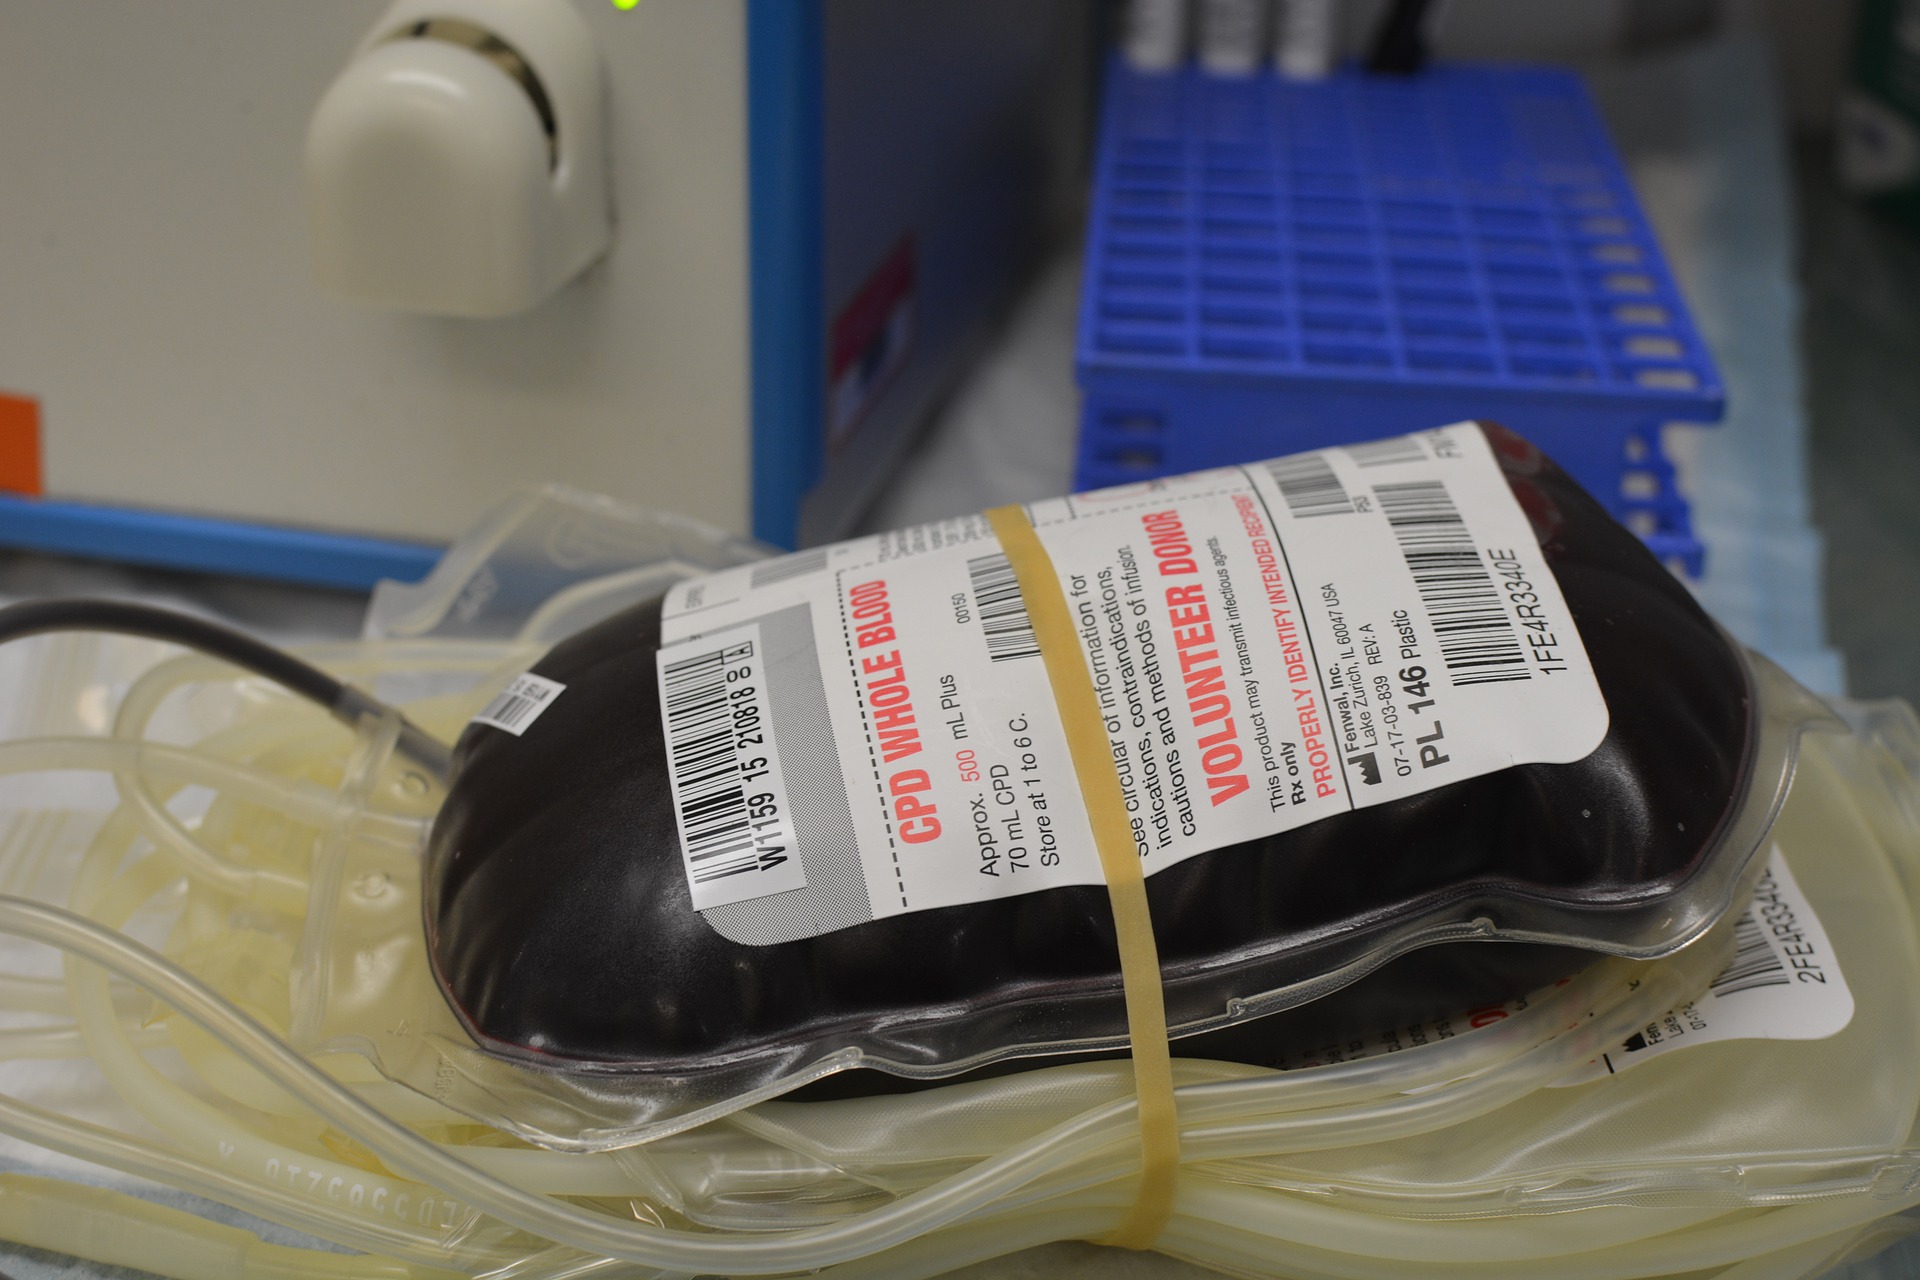 Local patients at risk due to severe blood shortages